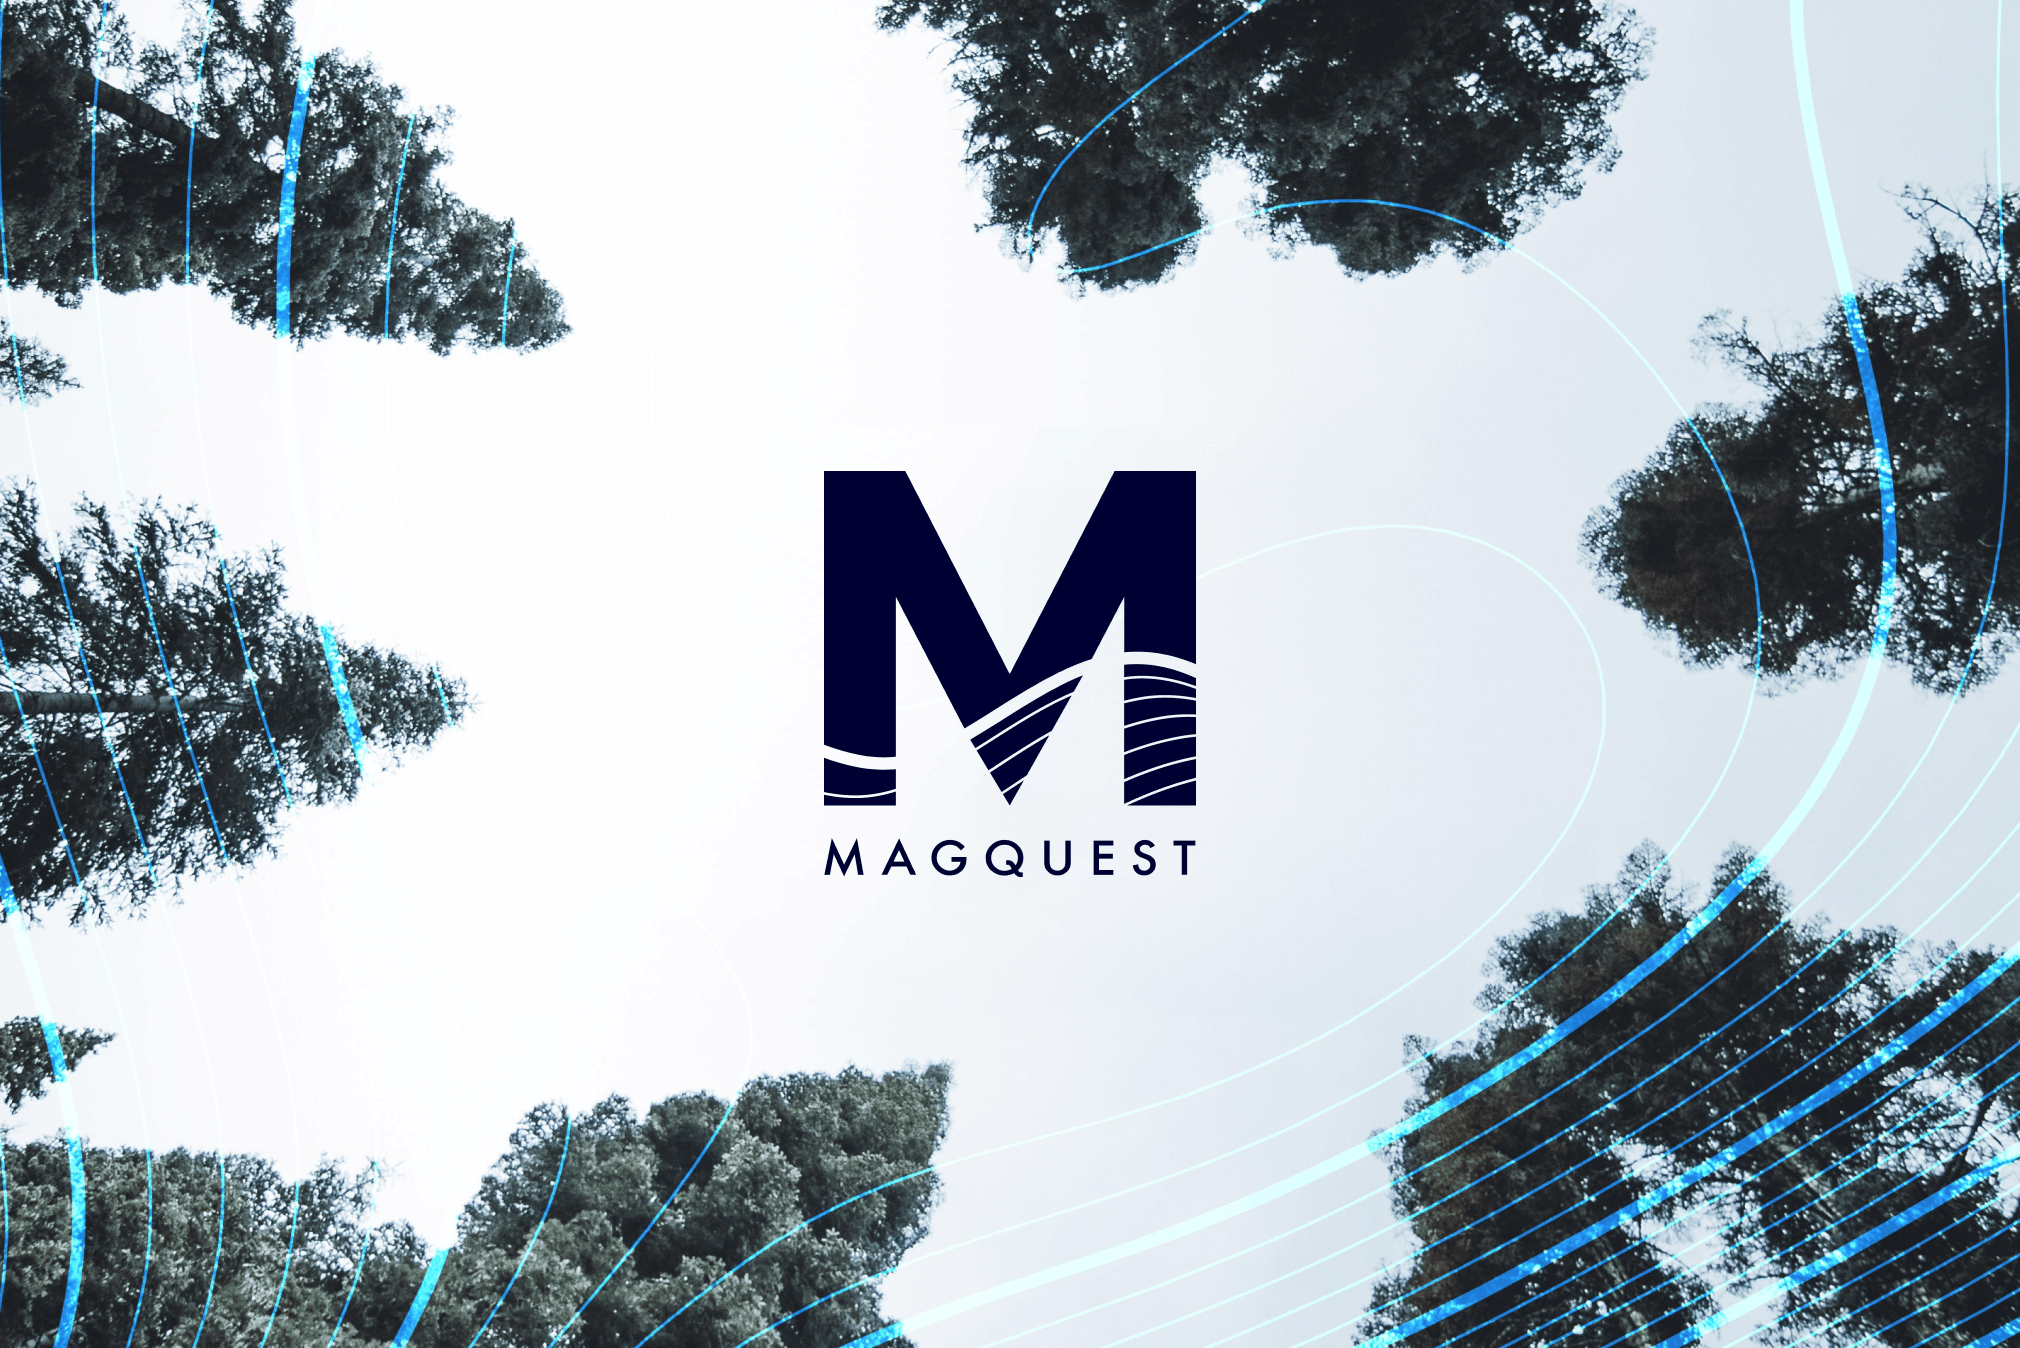 MagQuest awards $900,000 to Phase 3 winners